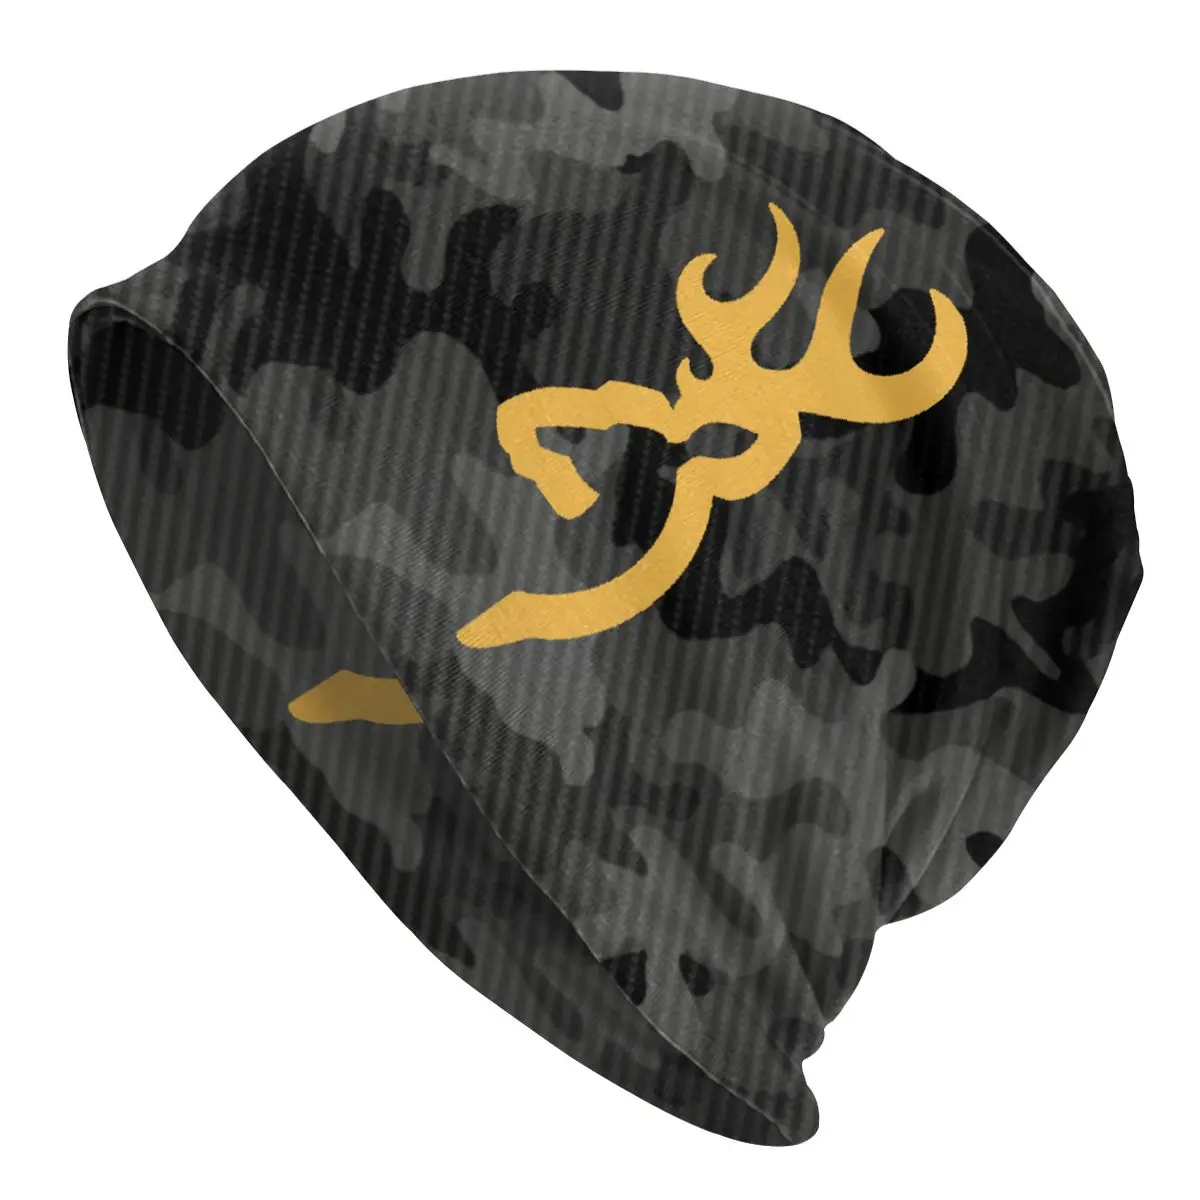 Browning Military Army Camouflage Skullies Beanies Caps For Men Women Unisex Winter Warm Knitted Hat Adult Camo Bonnet Hats 1